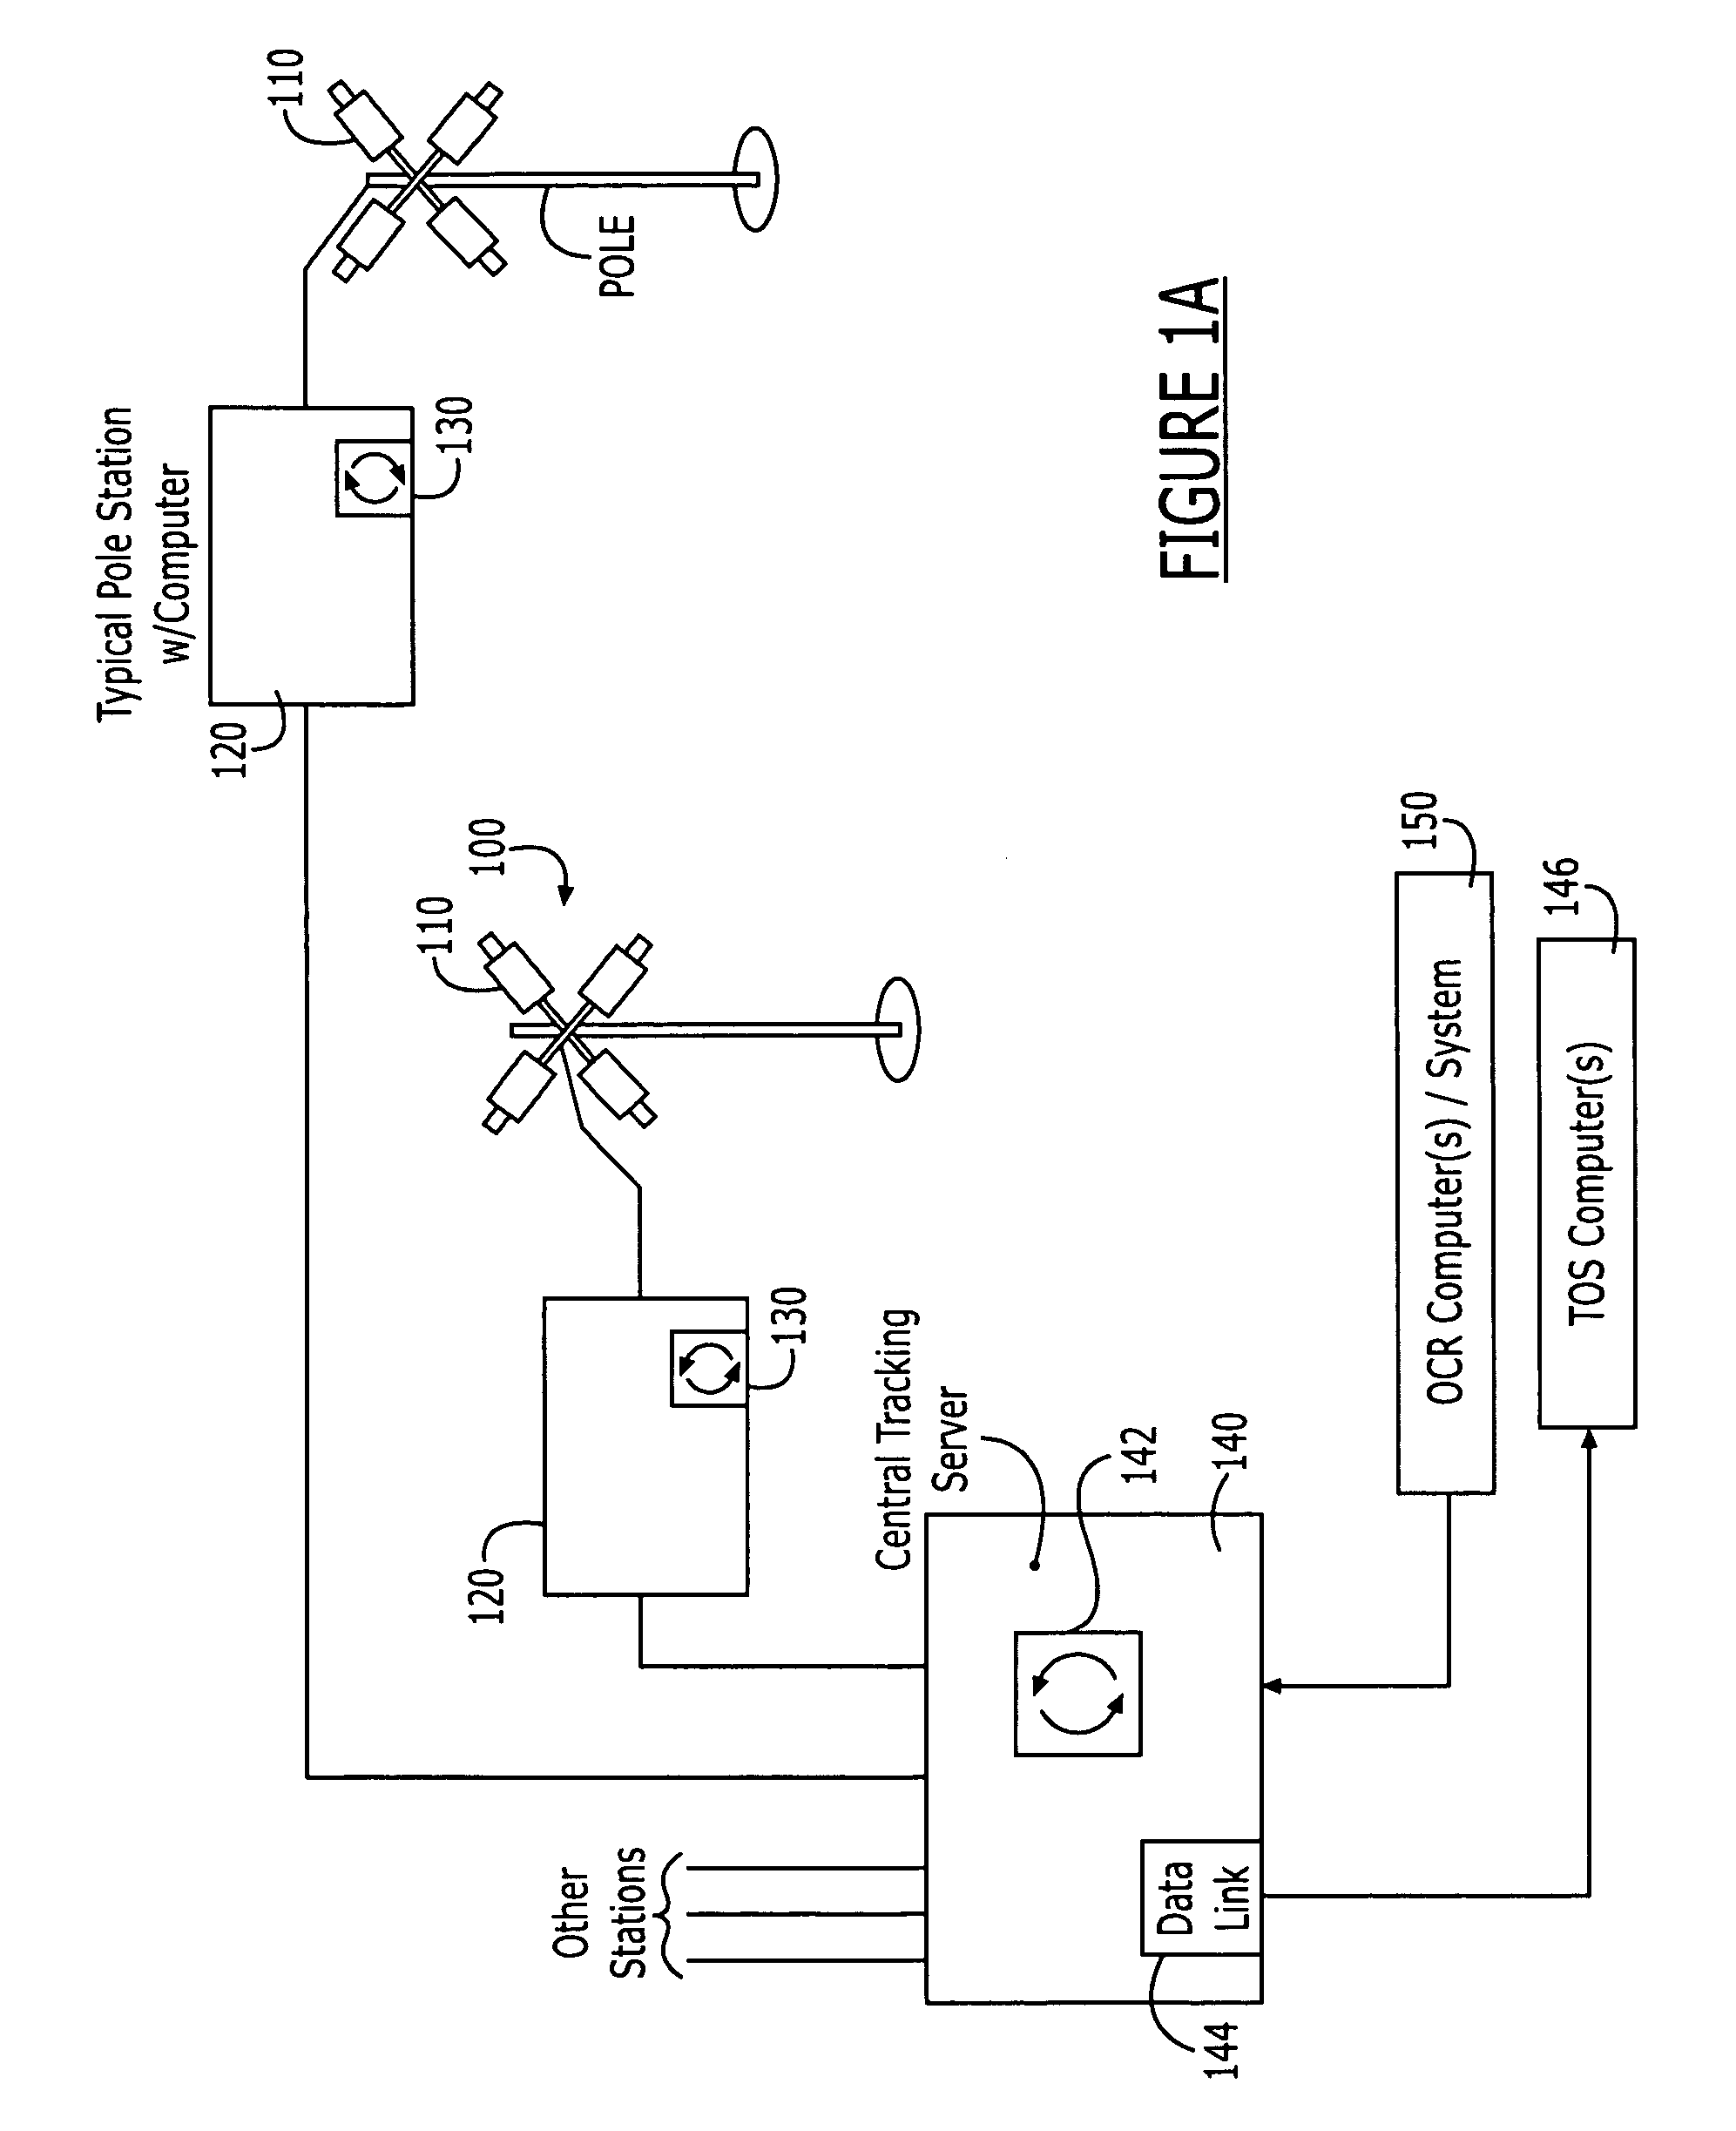 Systems and methods for monitoring and tracking movement and location of shipping containers and vehicles using a vision based system